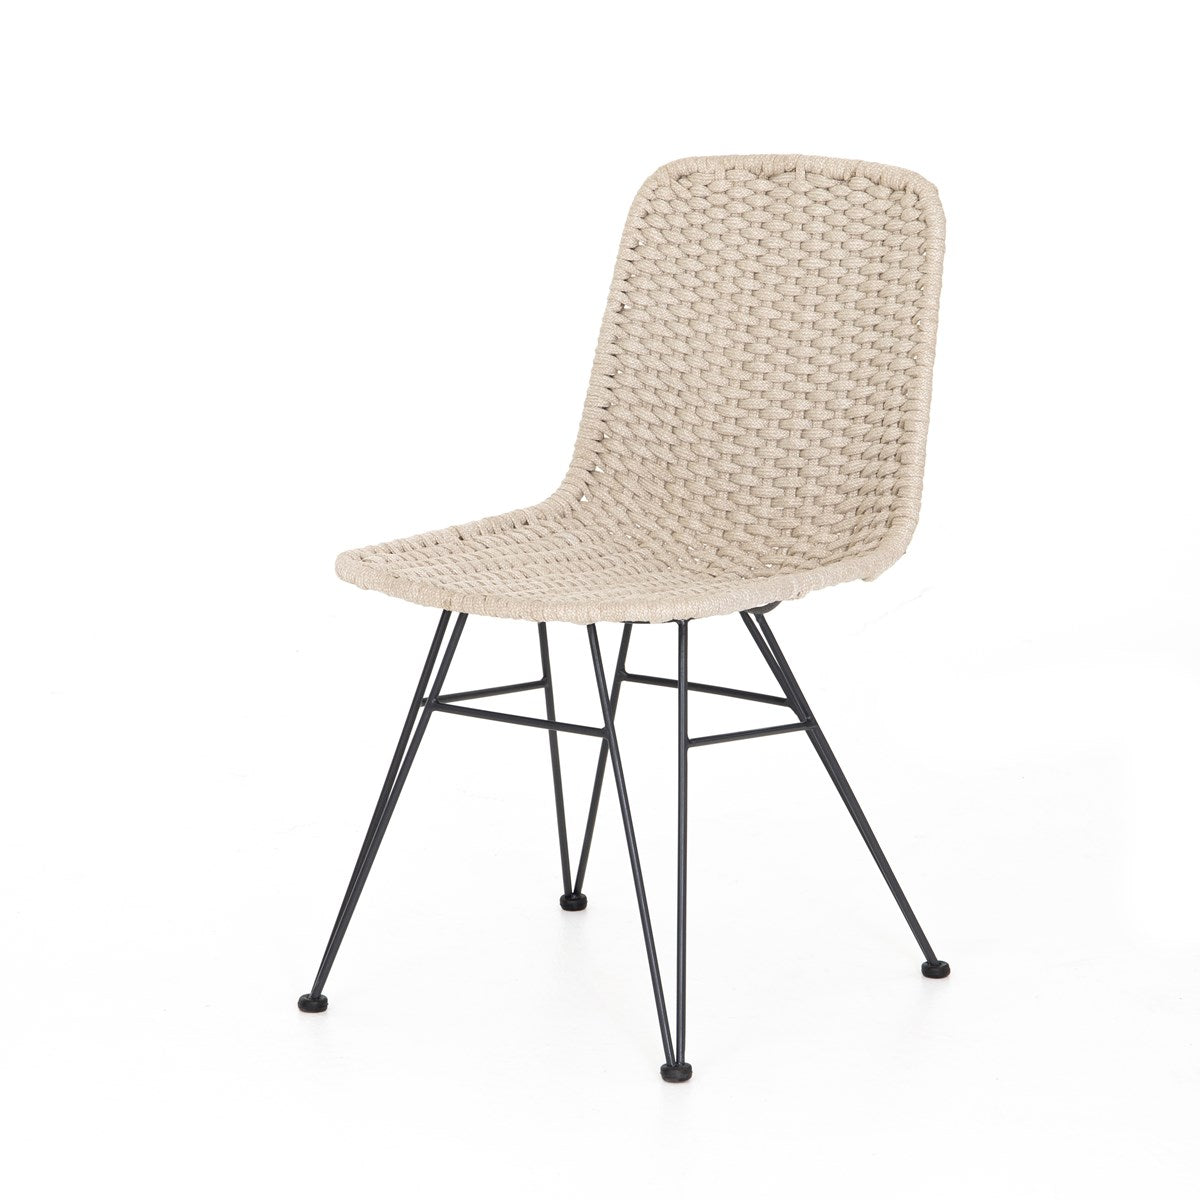 Load image into Gallery viewer, Dema Outdoor Dining Chair NaturalDinning Chair Four Hands  Natural   Four Hands, Burke Decor, Mid Century Modern Furniture, Old Bones Furniture Company, Old Bones Co, Modern Mid Century, Designer Furniture, https://www.oldbonesco.com/
